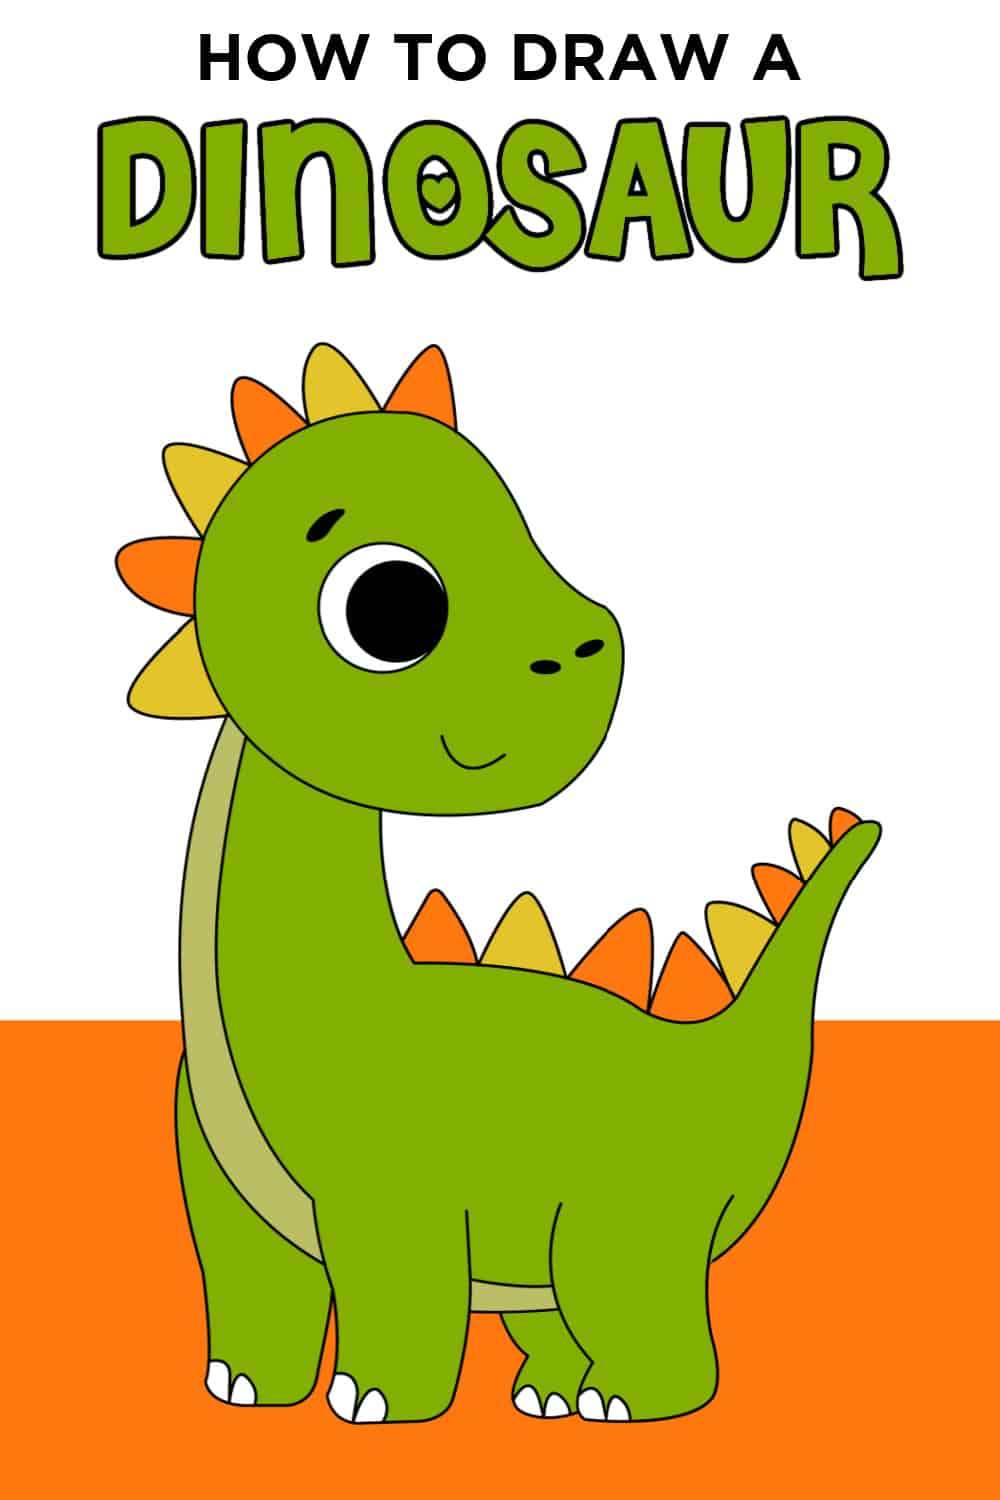 How to Draw a Dinosaur easy